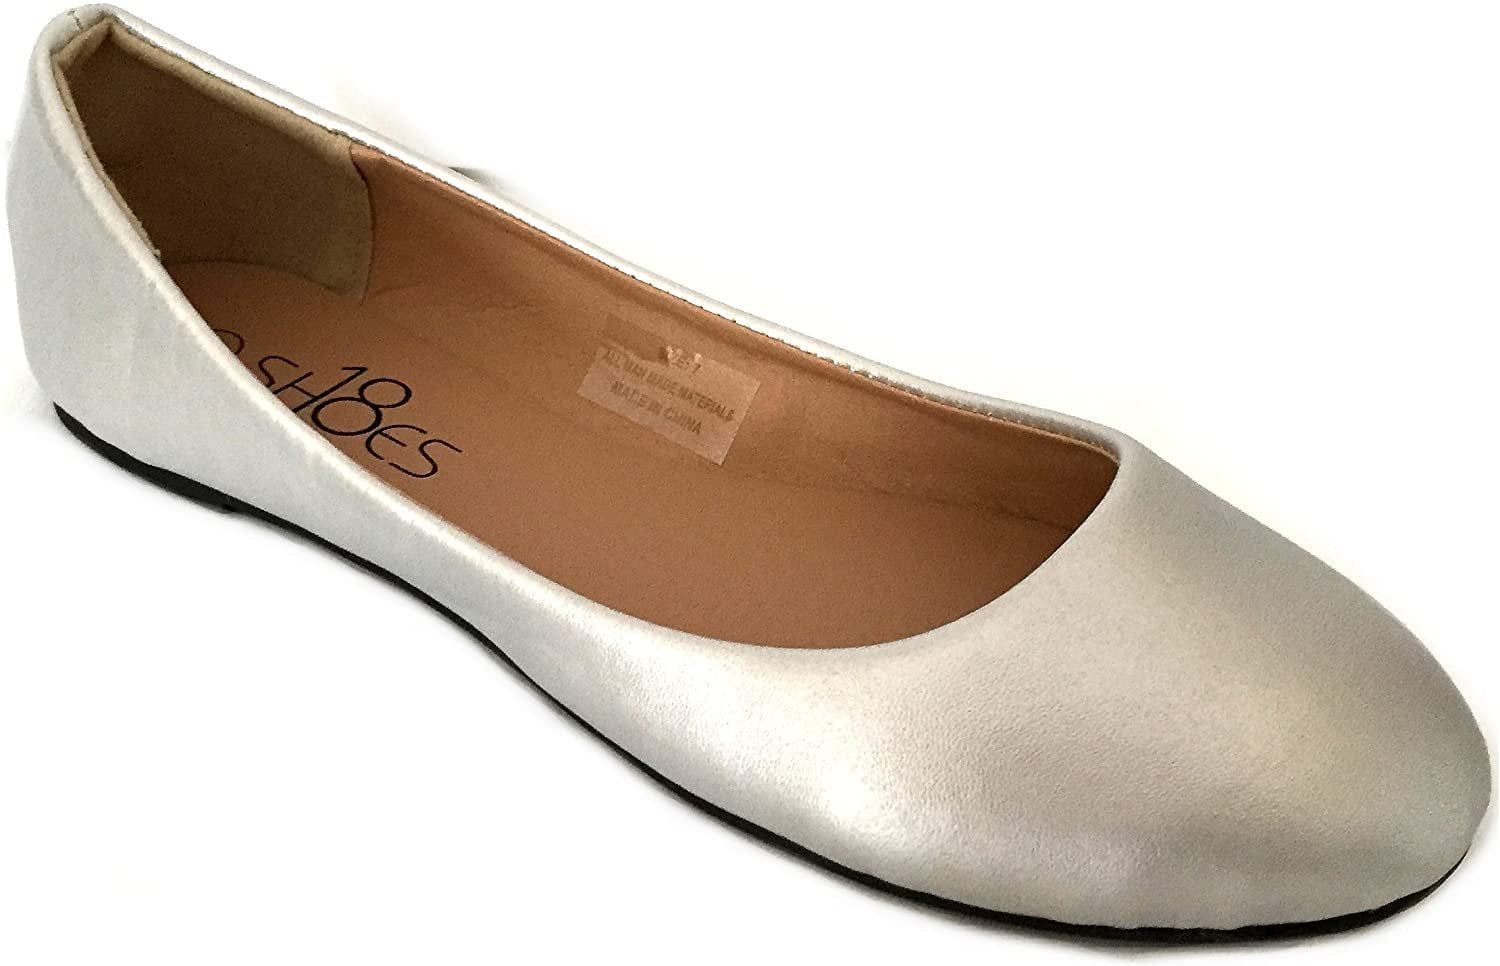 Shoes 18 Womens Classic Round Toe Ballerina Ballet Flat Shoes 8600 Silver Pu 65